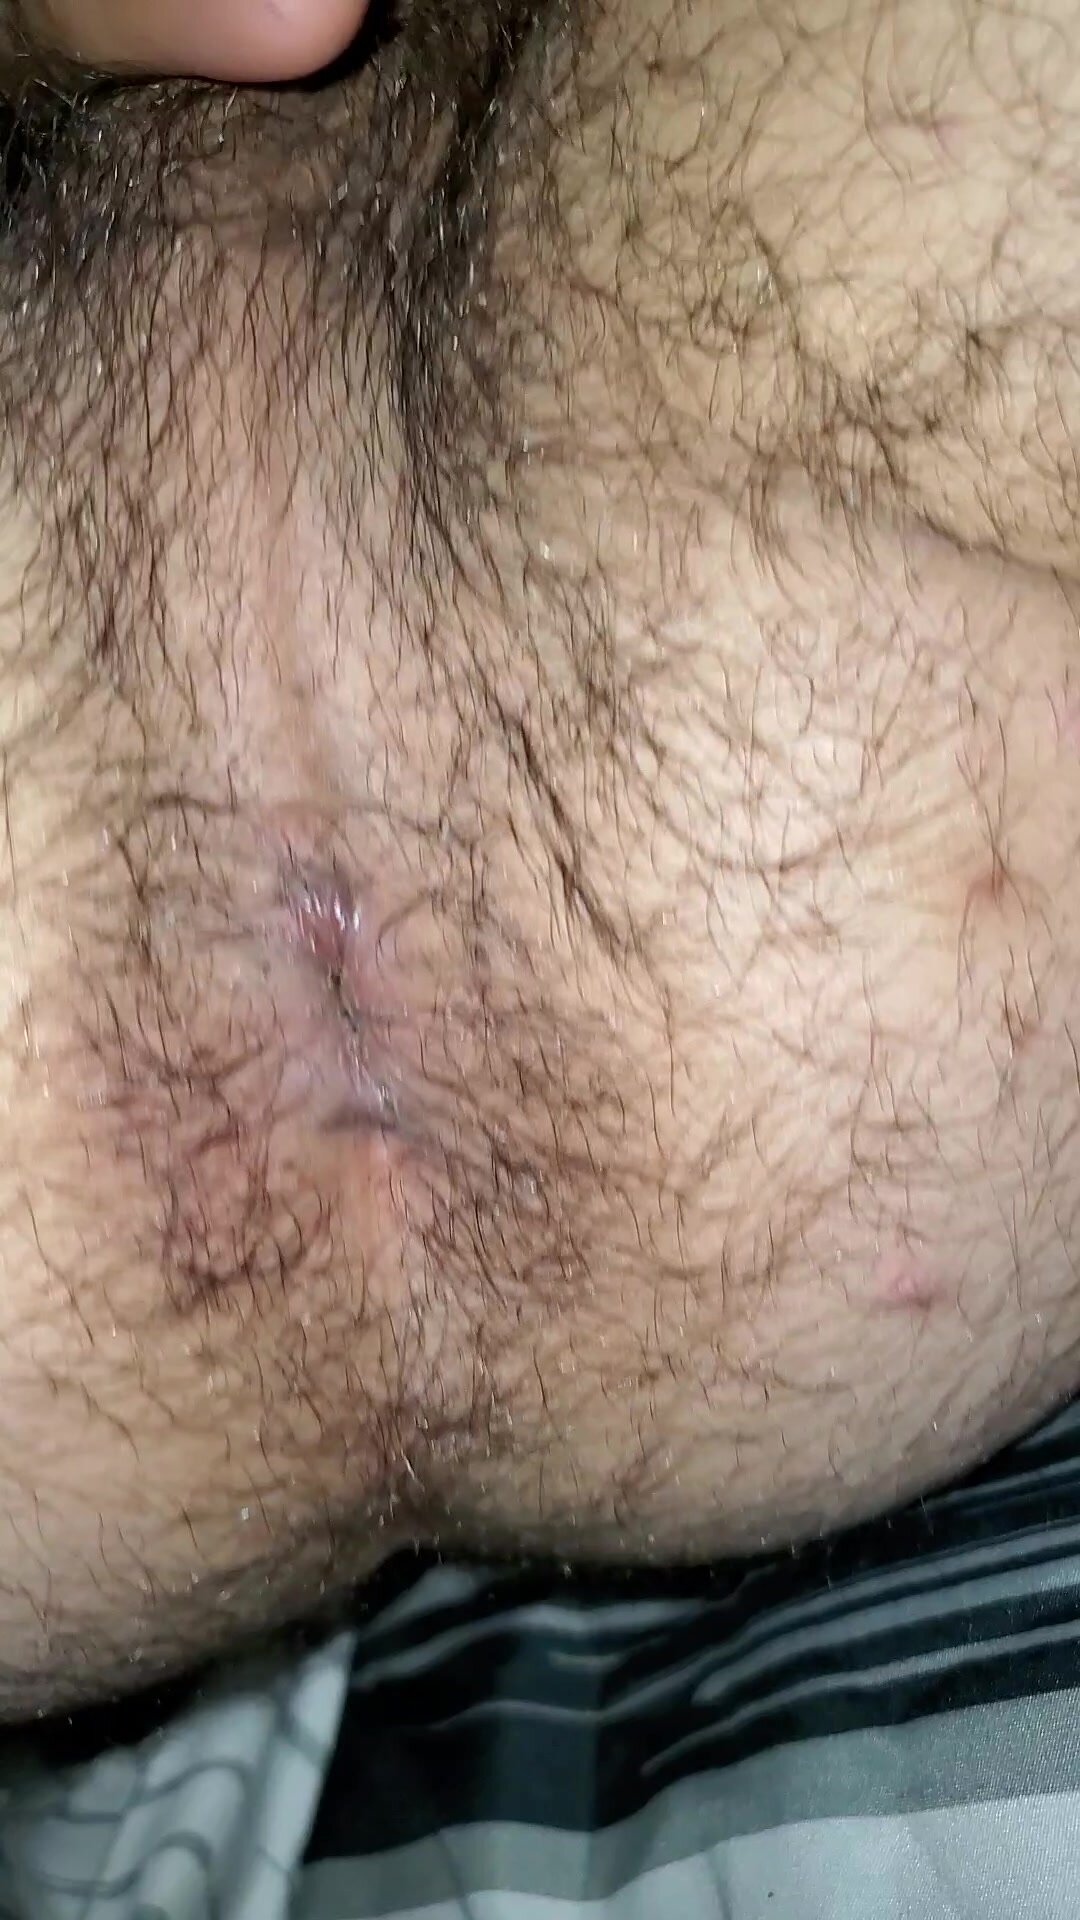 Sniff my hairy hole